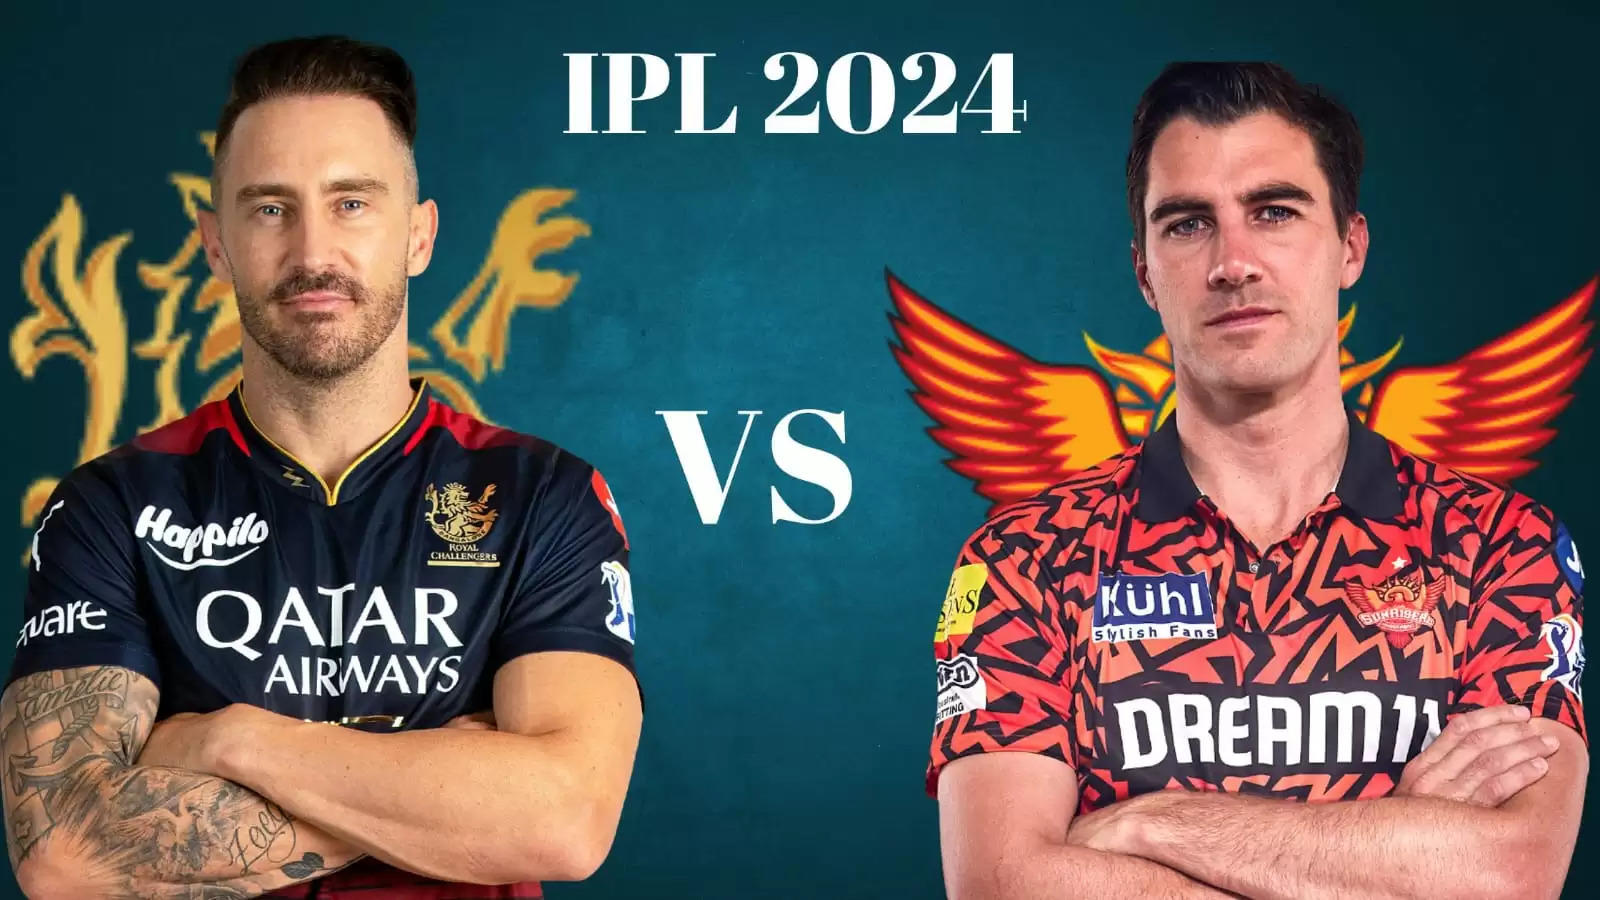 RCB vs SRH Dream11 Prediction Today Match 30: Playing XI, IPL 2024 Fantasy Cricket Tips, Royal Challengers Bengaluru vs Sunrisers Hyderabad Dream11 Team, Weather and Pitch Report, Injury and Team News